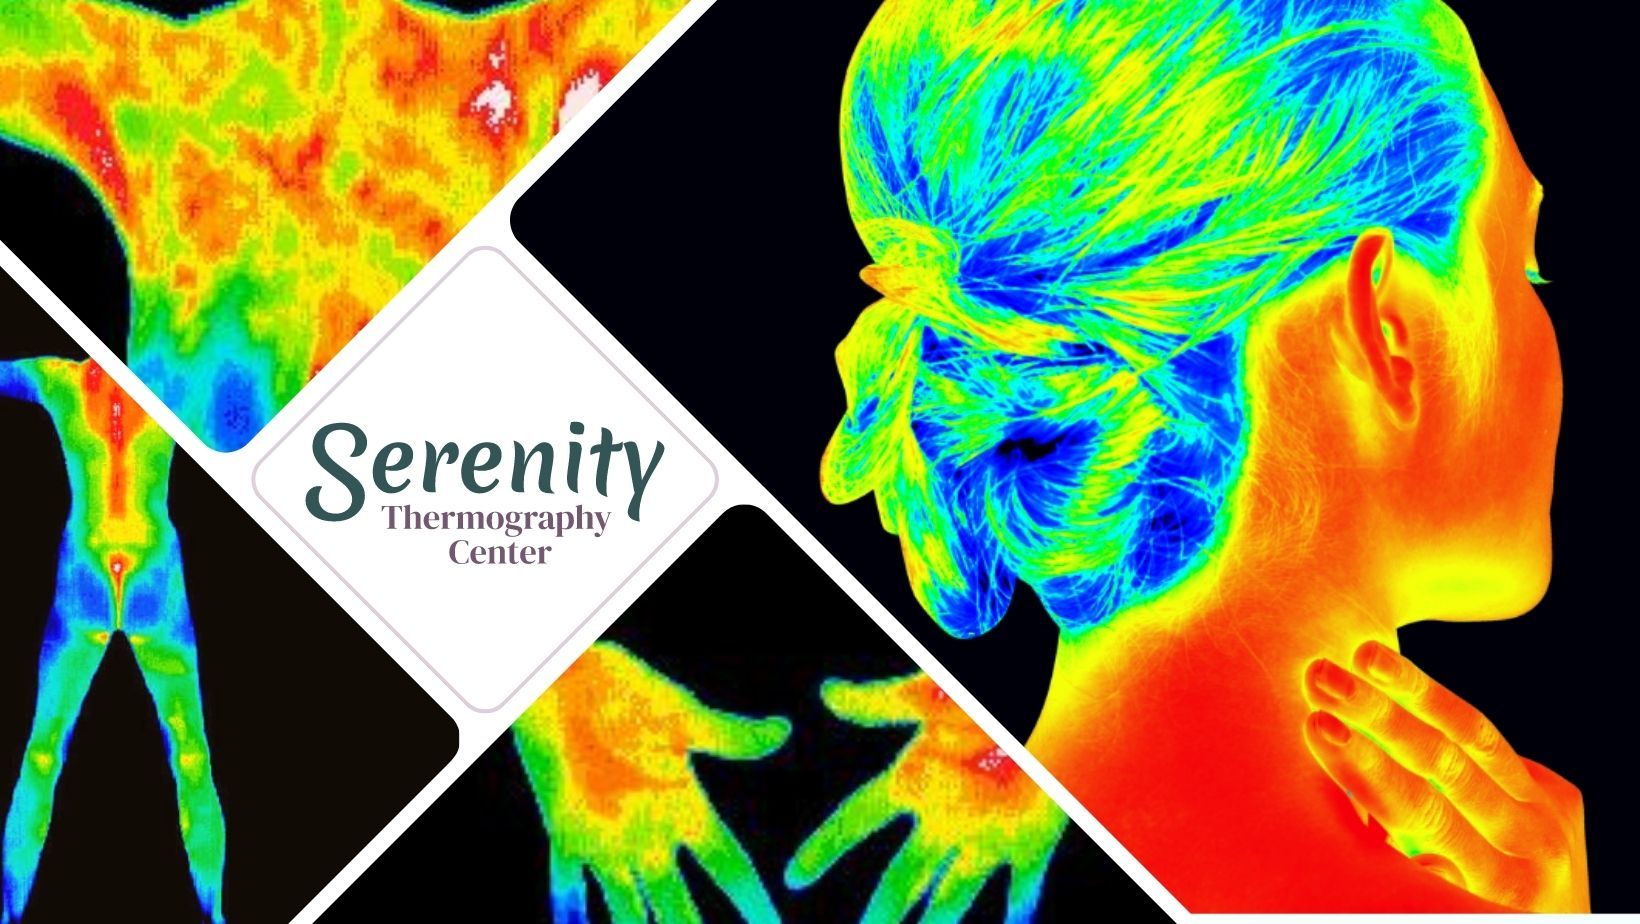 a collage made with thermograms and the serenity health care center Thermography Center in Wisconsin